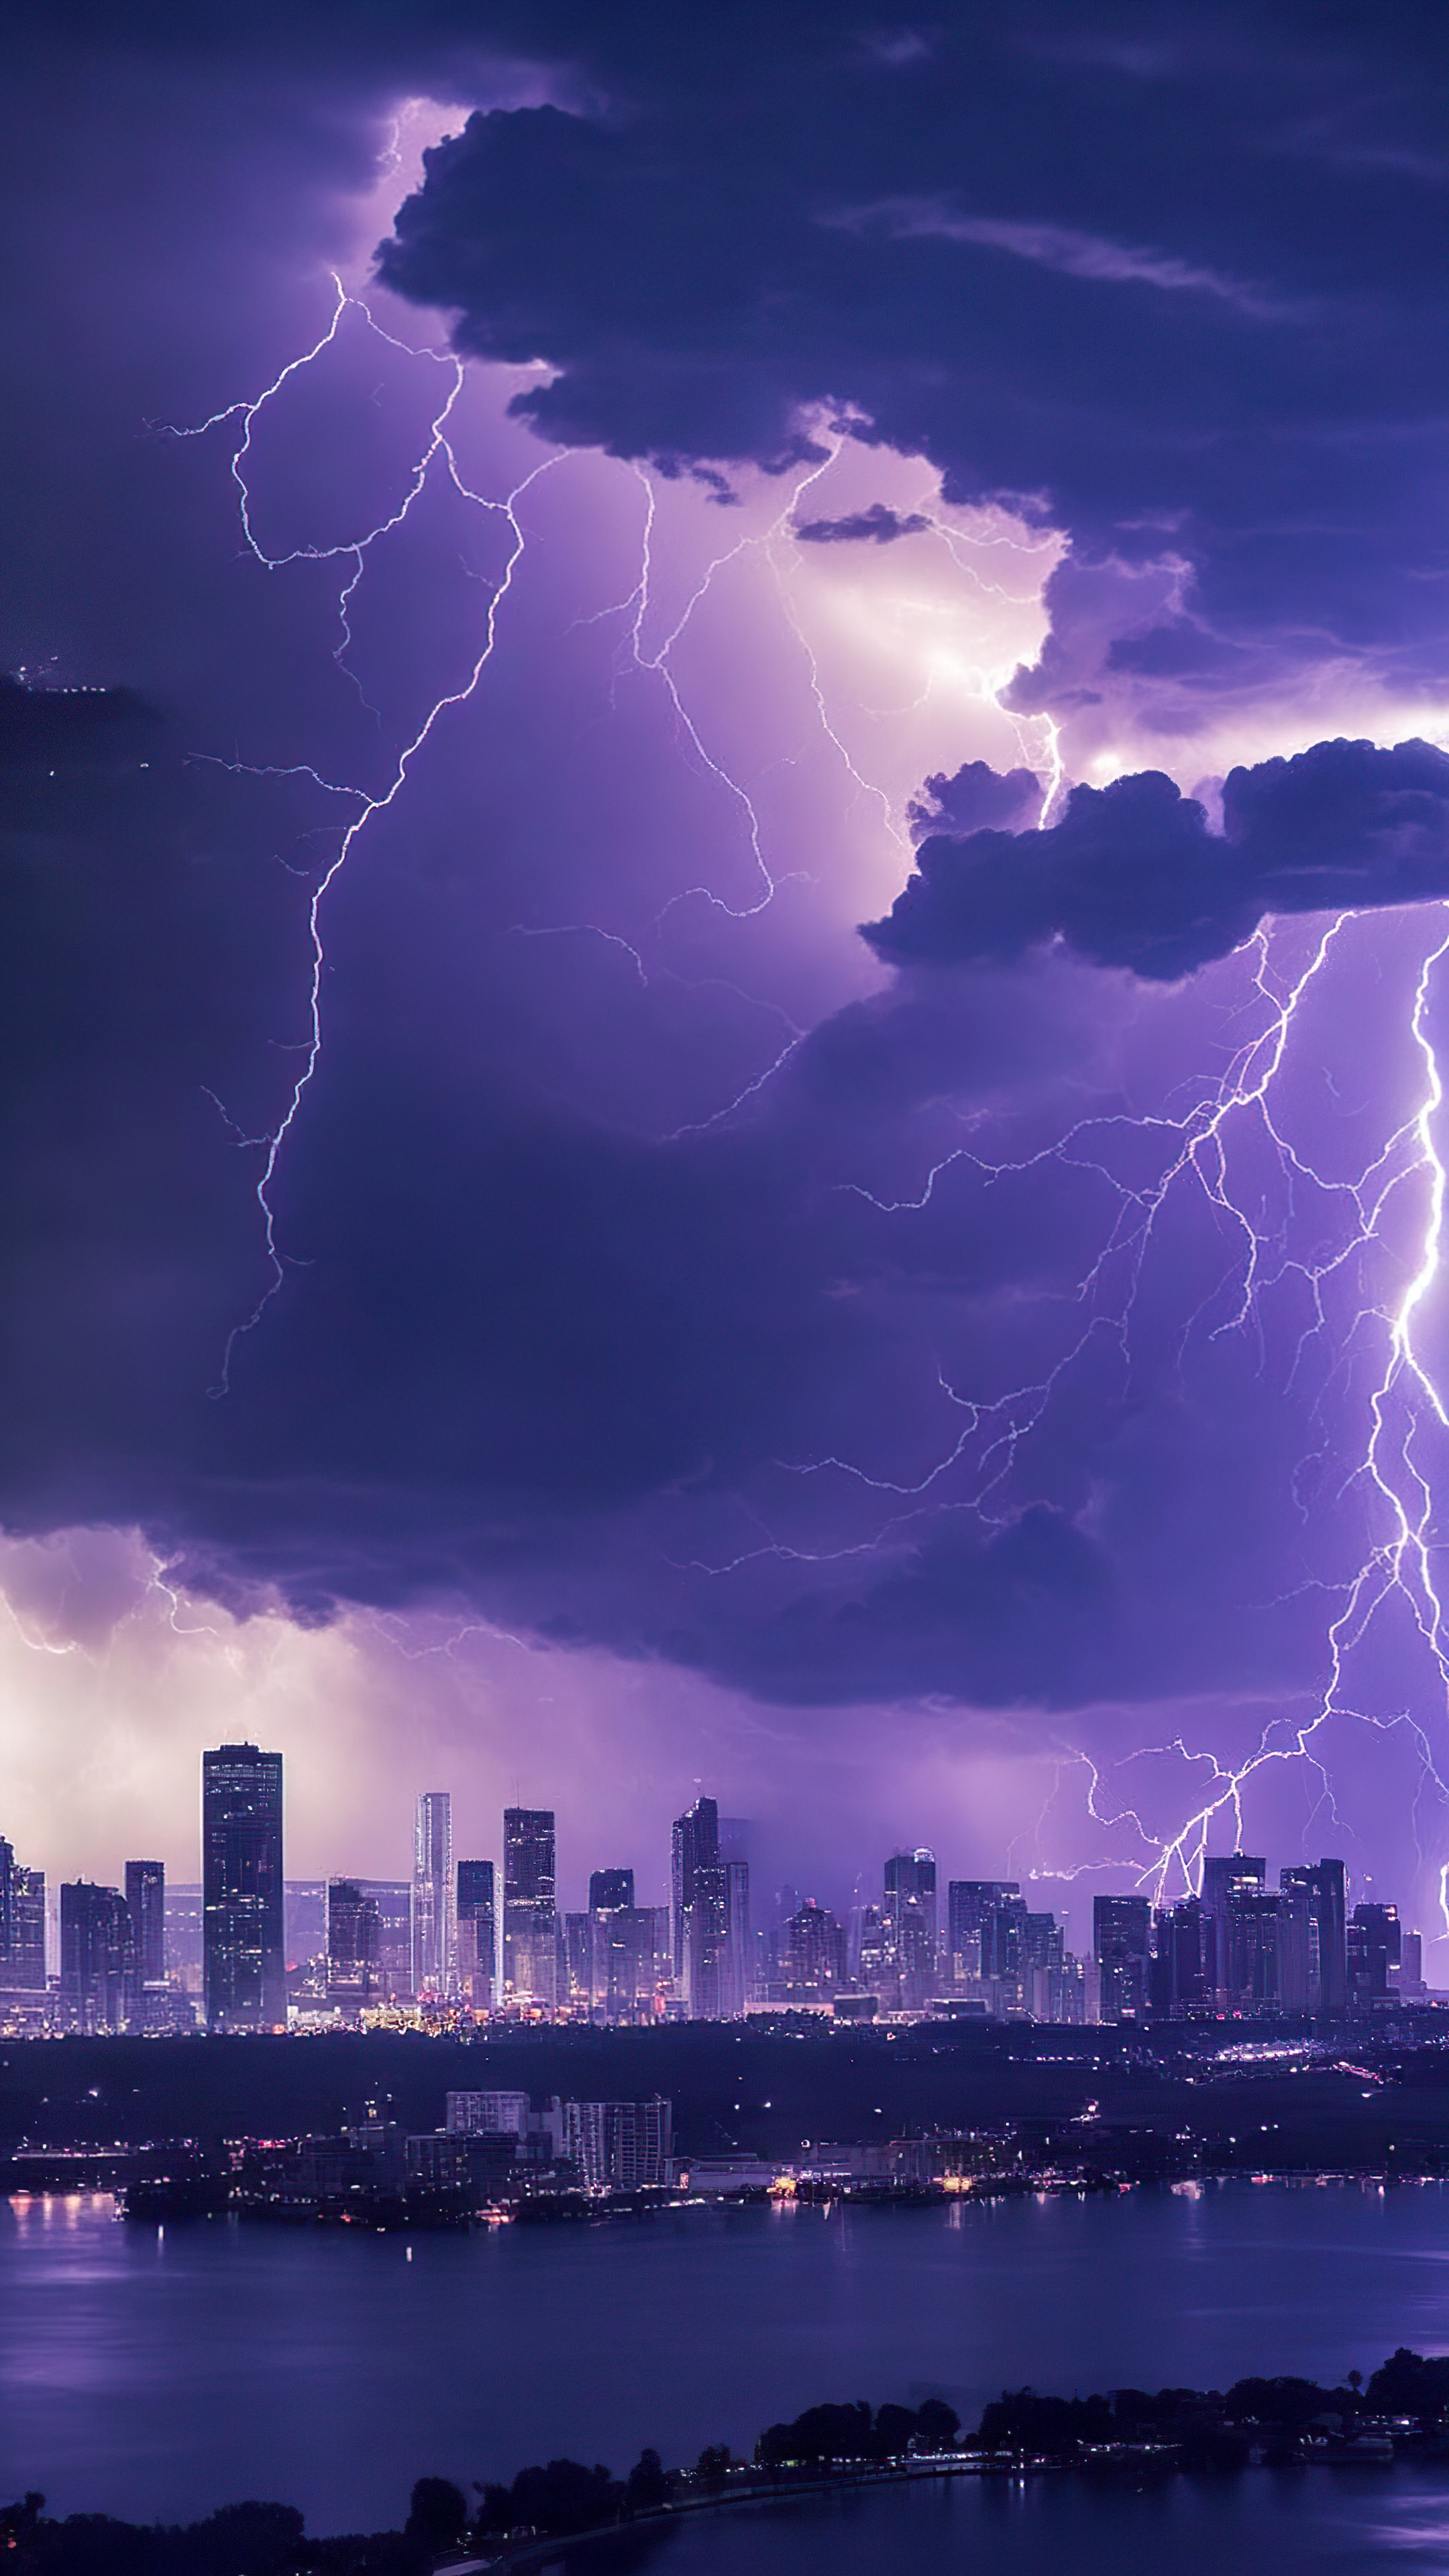 Experience the thrill of an epic thunderstorm brewing over a city skyline, with lightning bolts illuminating the dark clouds, with this cool sky wallpaper.